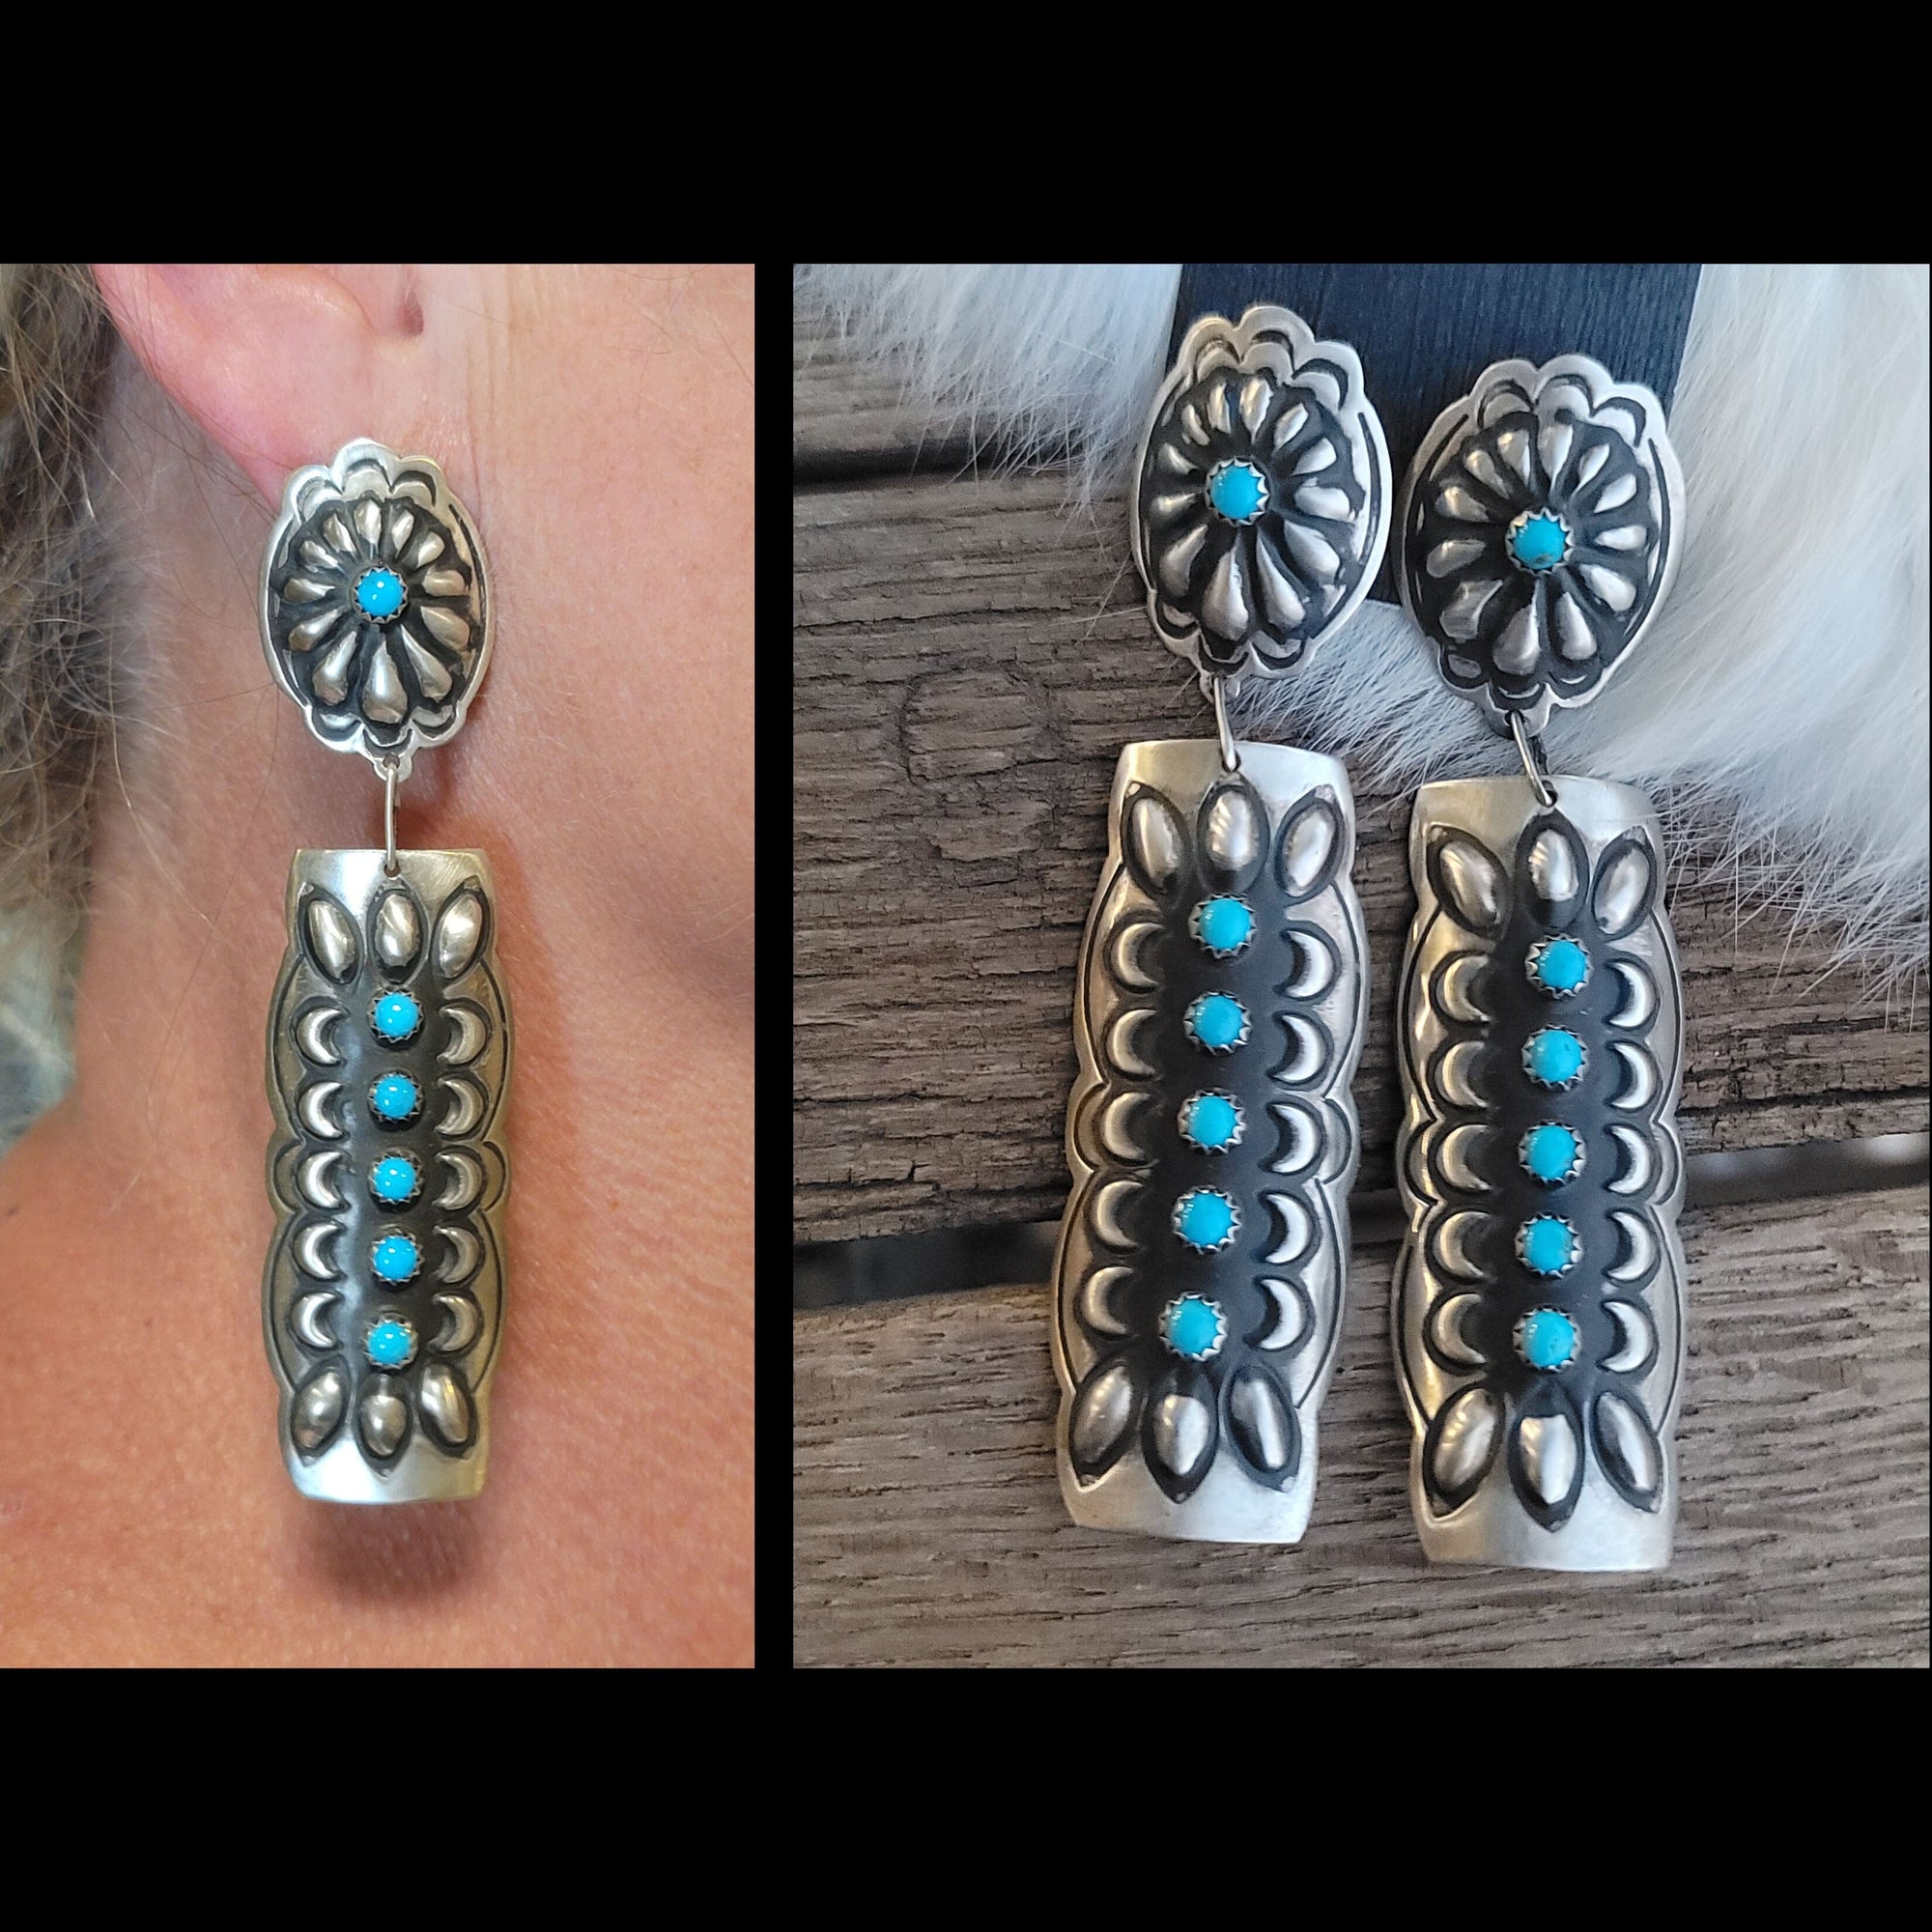 Turquoise & Stamped Sterling Post Earrings - EAZ146